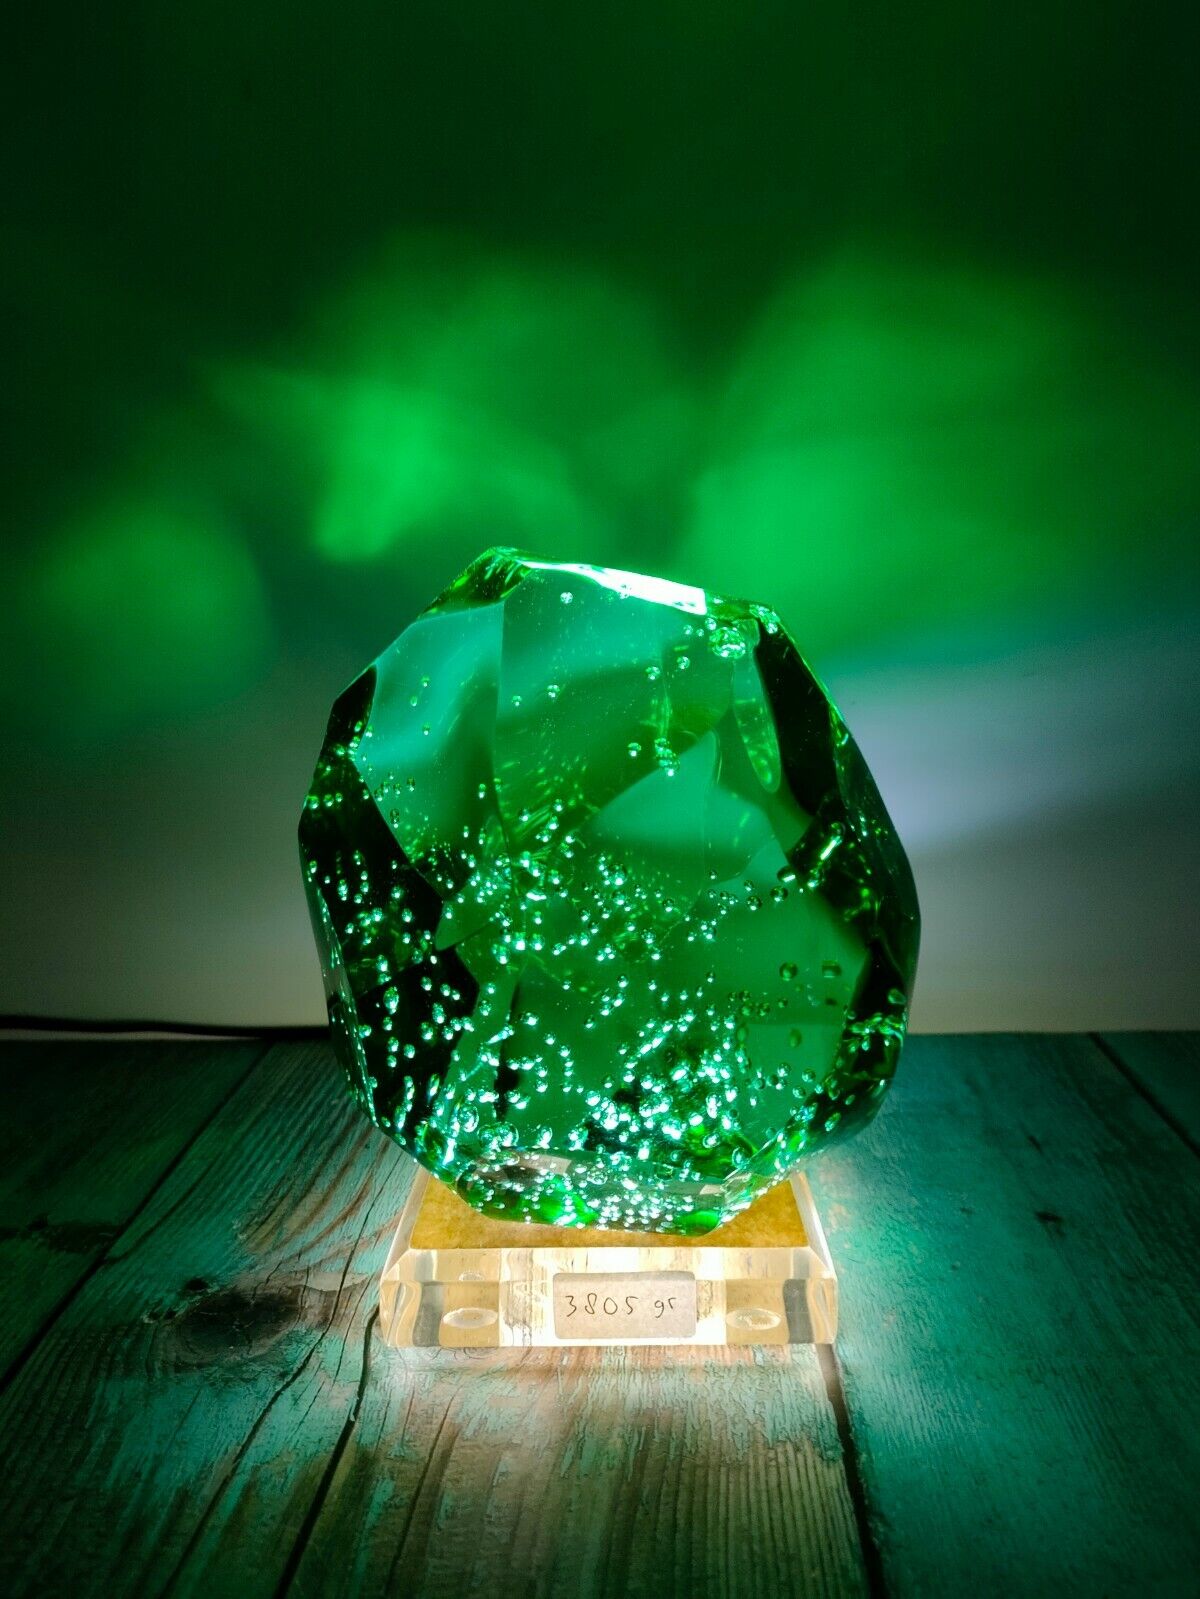 Andara Crystal Cutting emerald green bubble 3805gr with base, lamp & dimmer